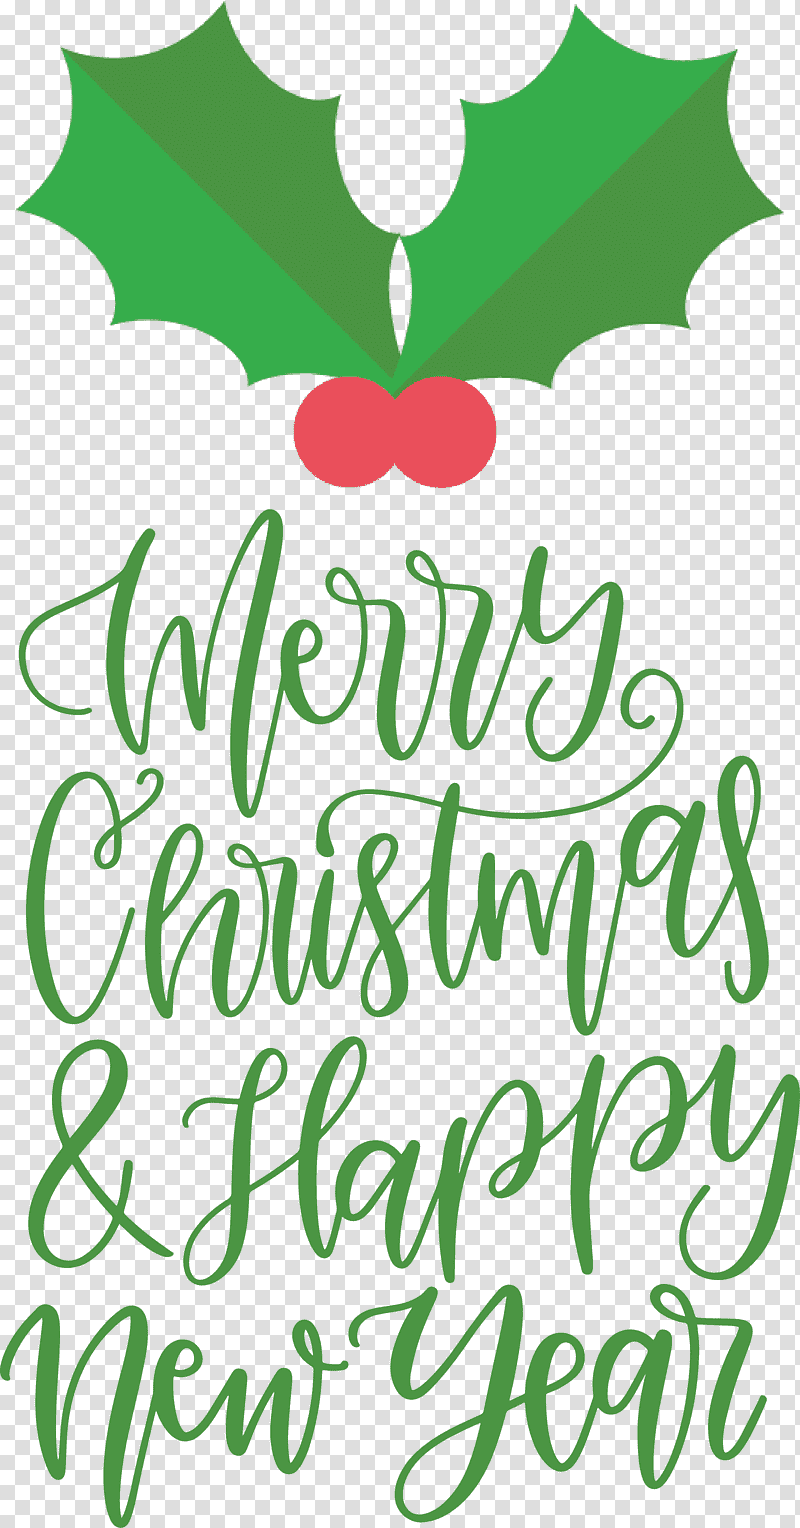 Merry Christmas Happy New Year, Floral Design, Leaf, Green, Meter, Tree, Mtree transparent background PNG clipart